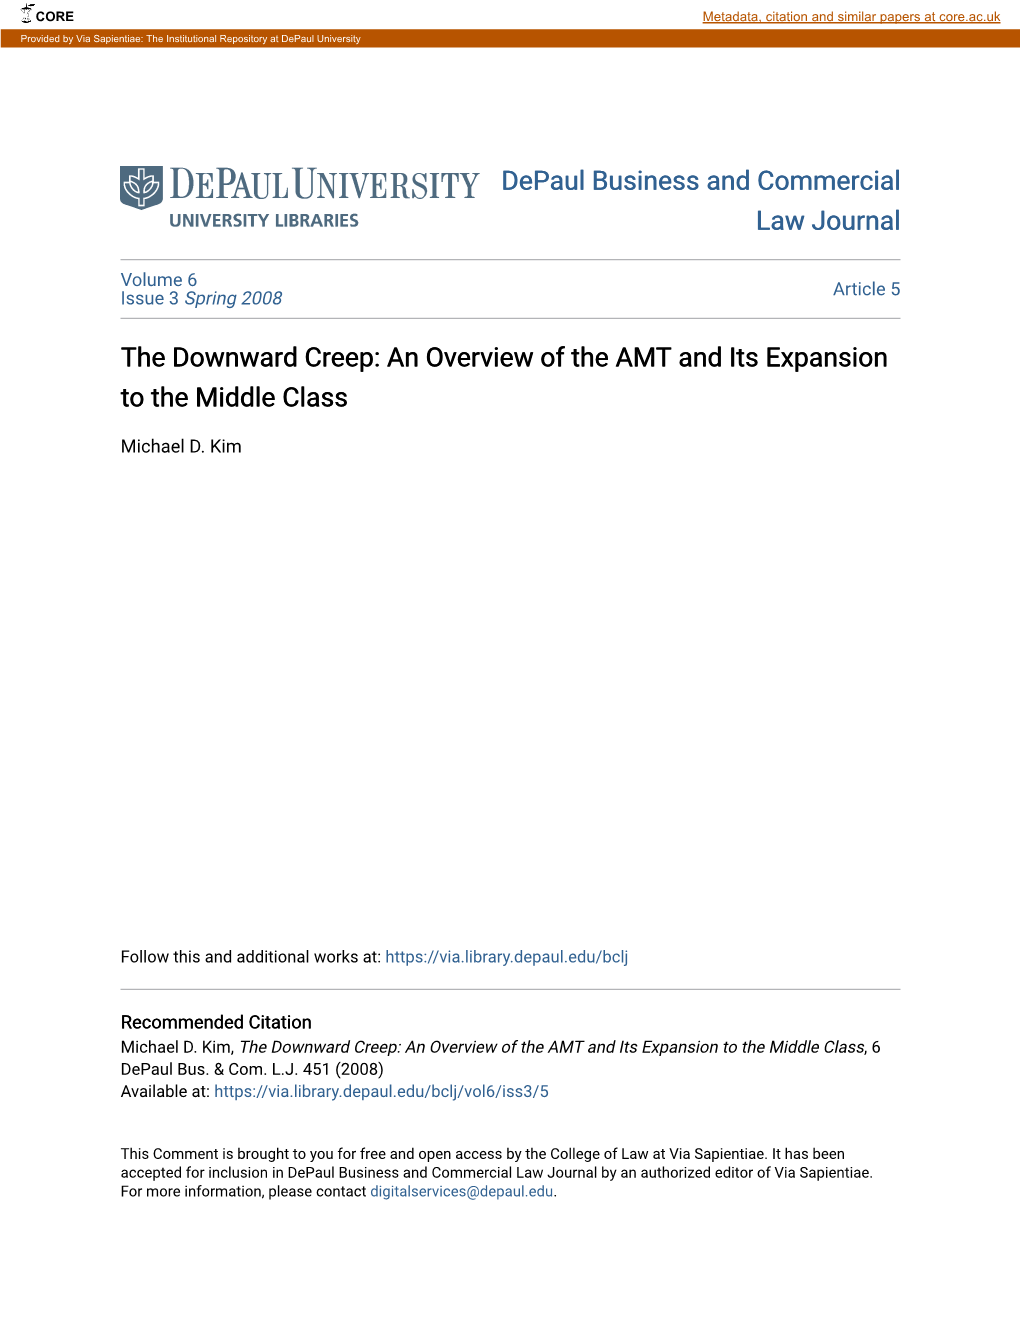 The Downward Creep: an Overview of the AMT and Its Expansion to the Middle Class